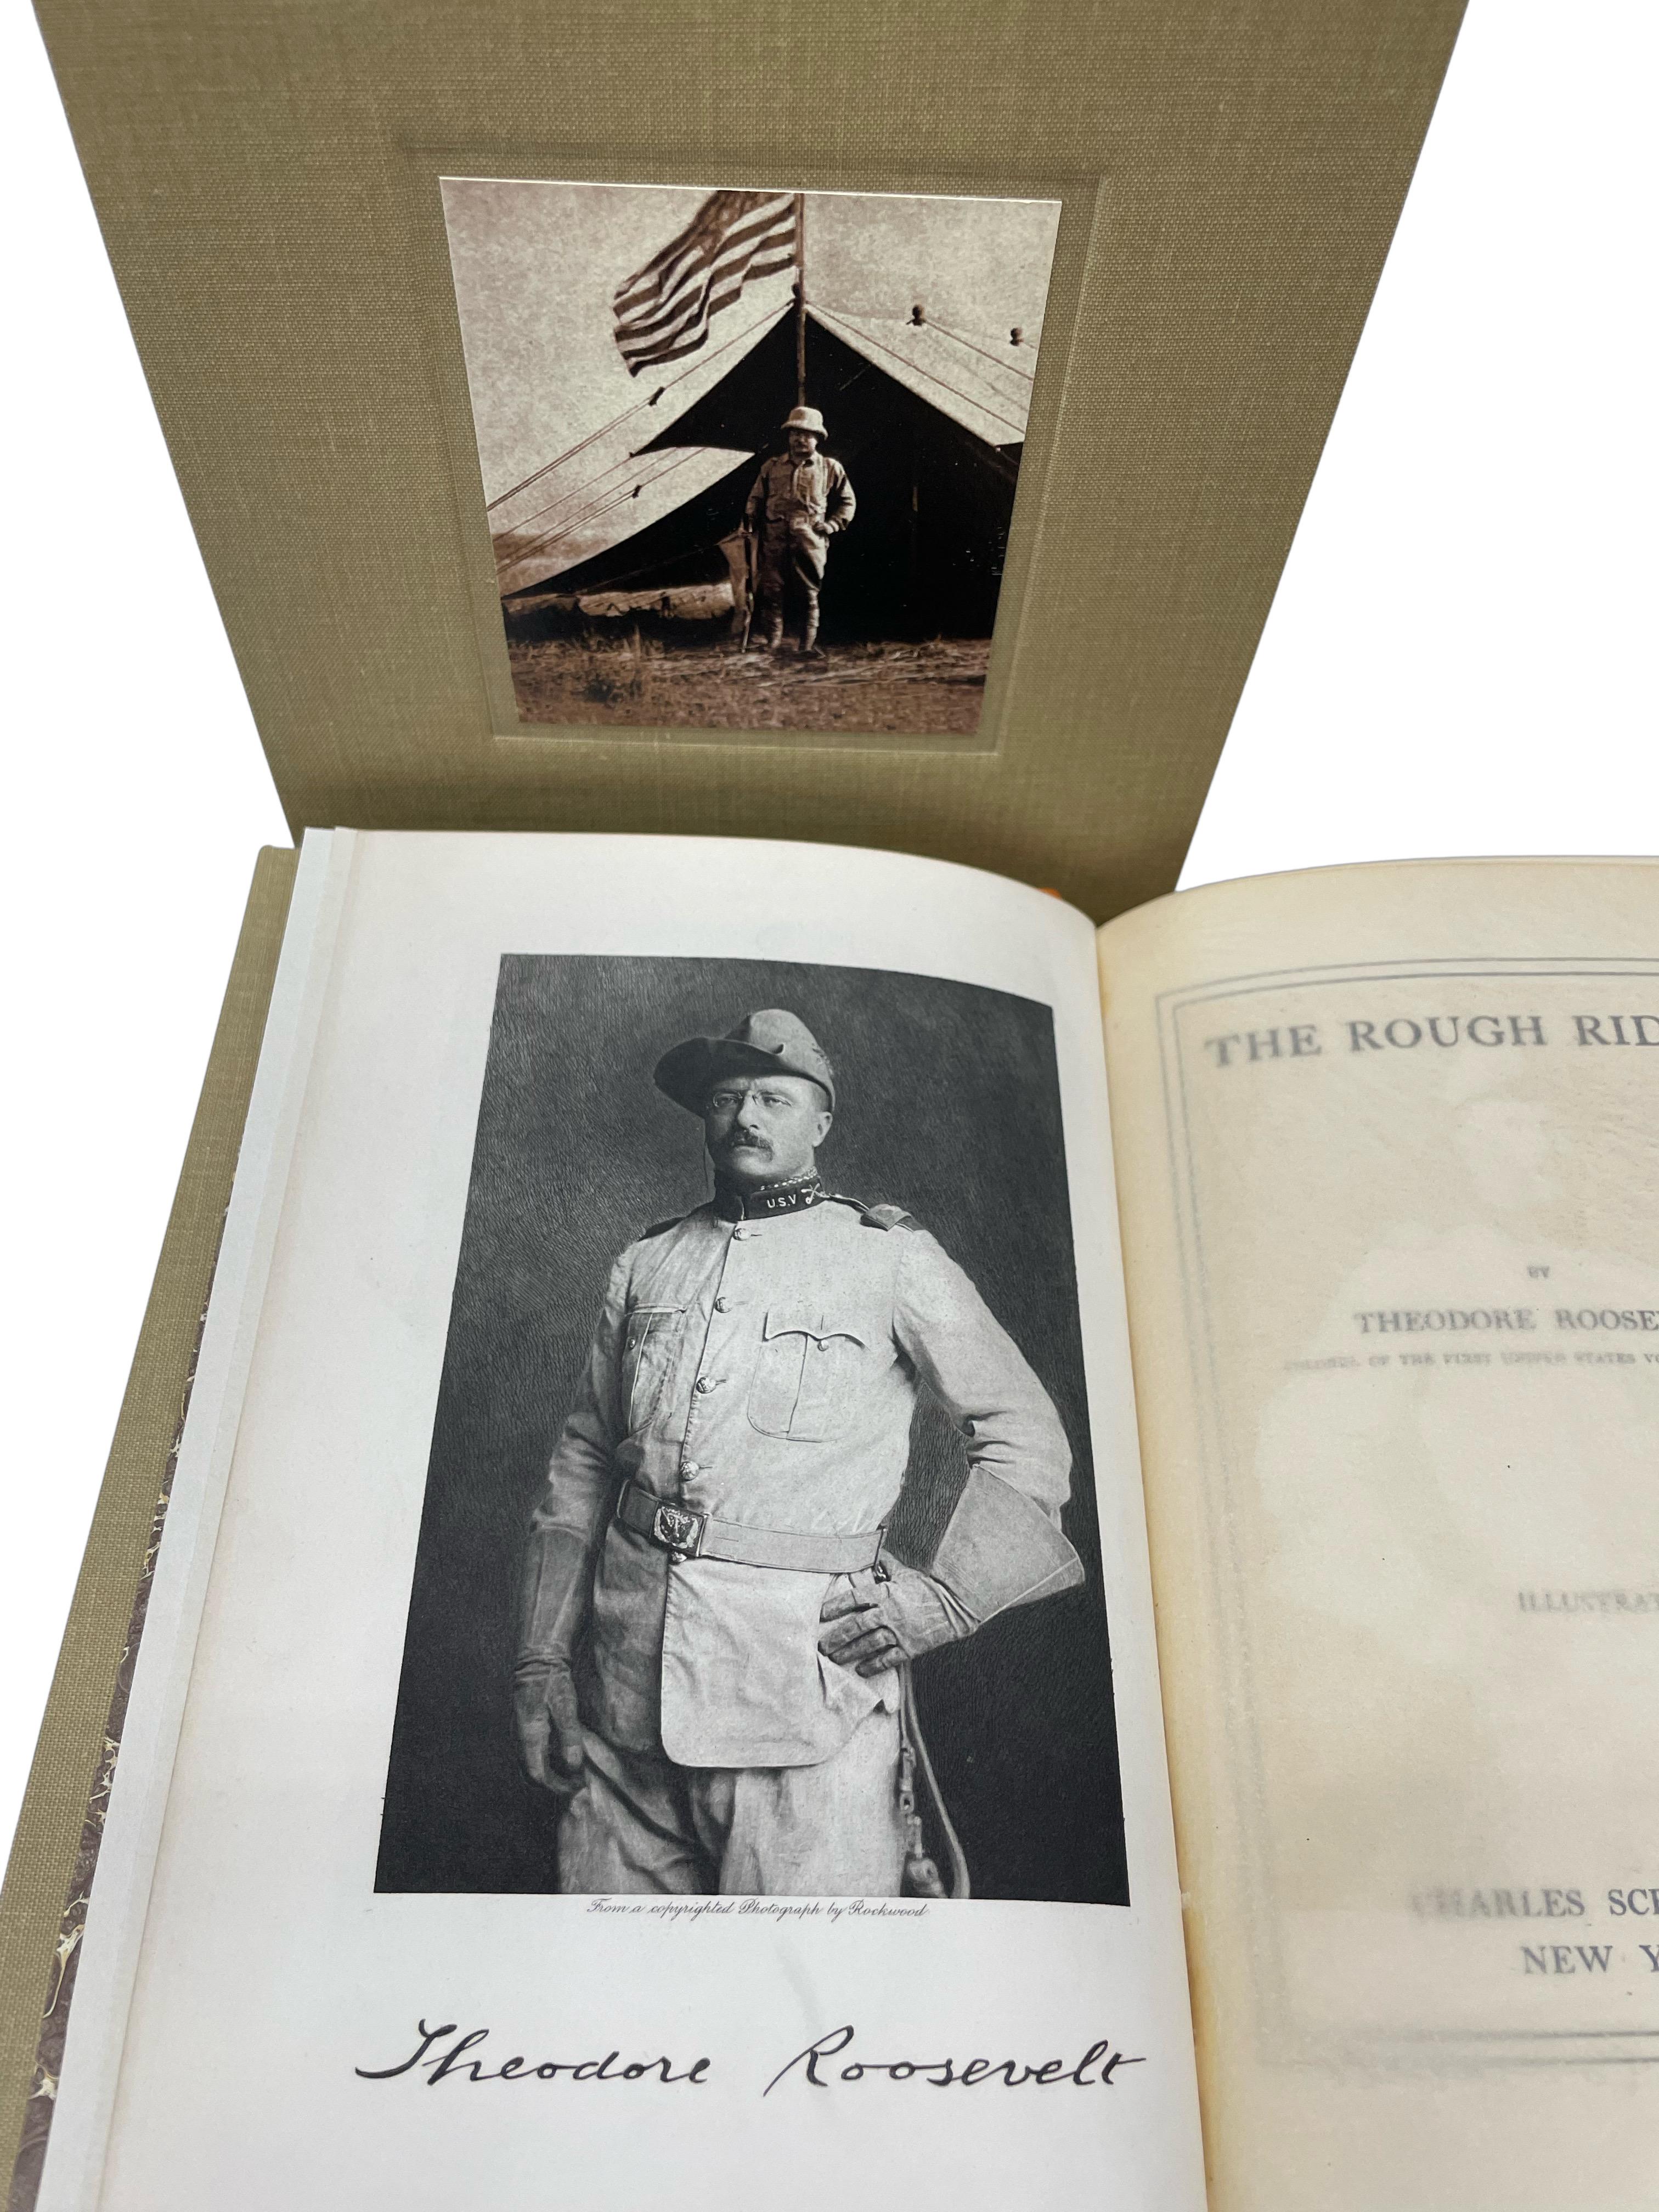 Paper Rough Riders by Theodore Roosevelt, First Edition, 1899